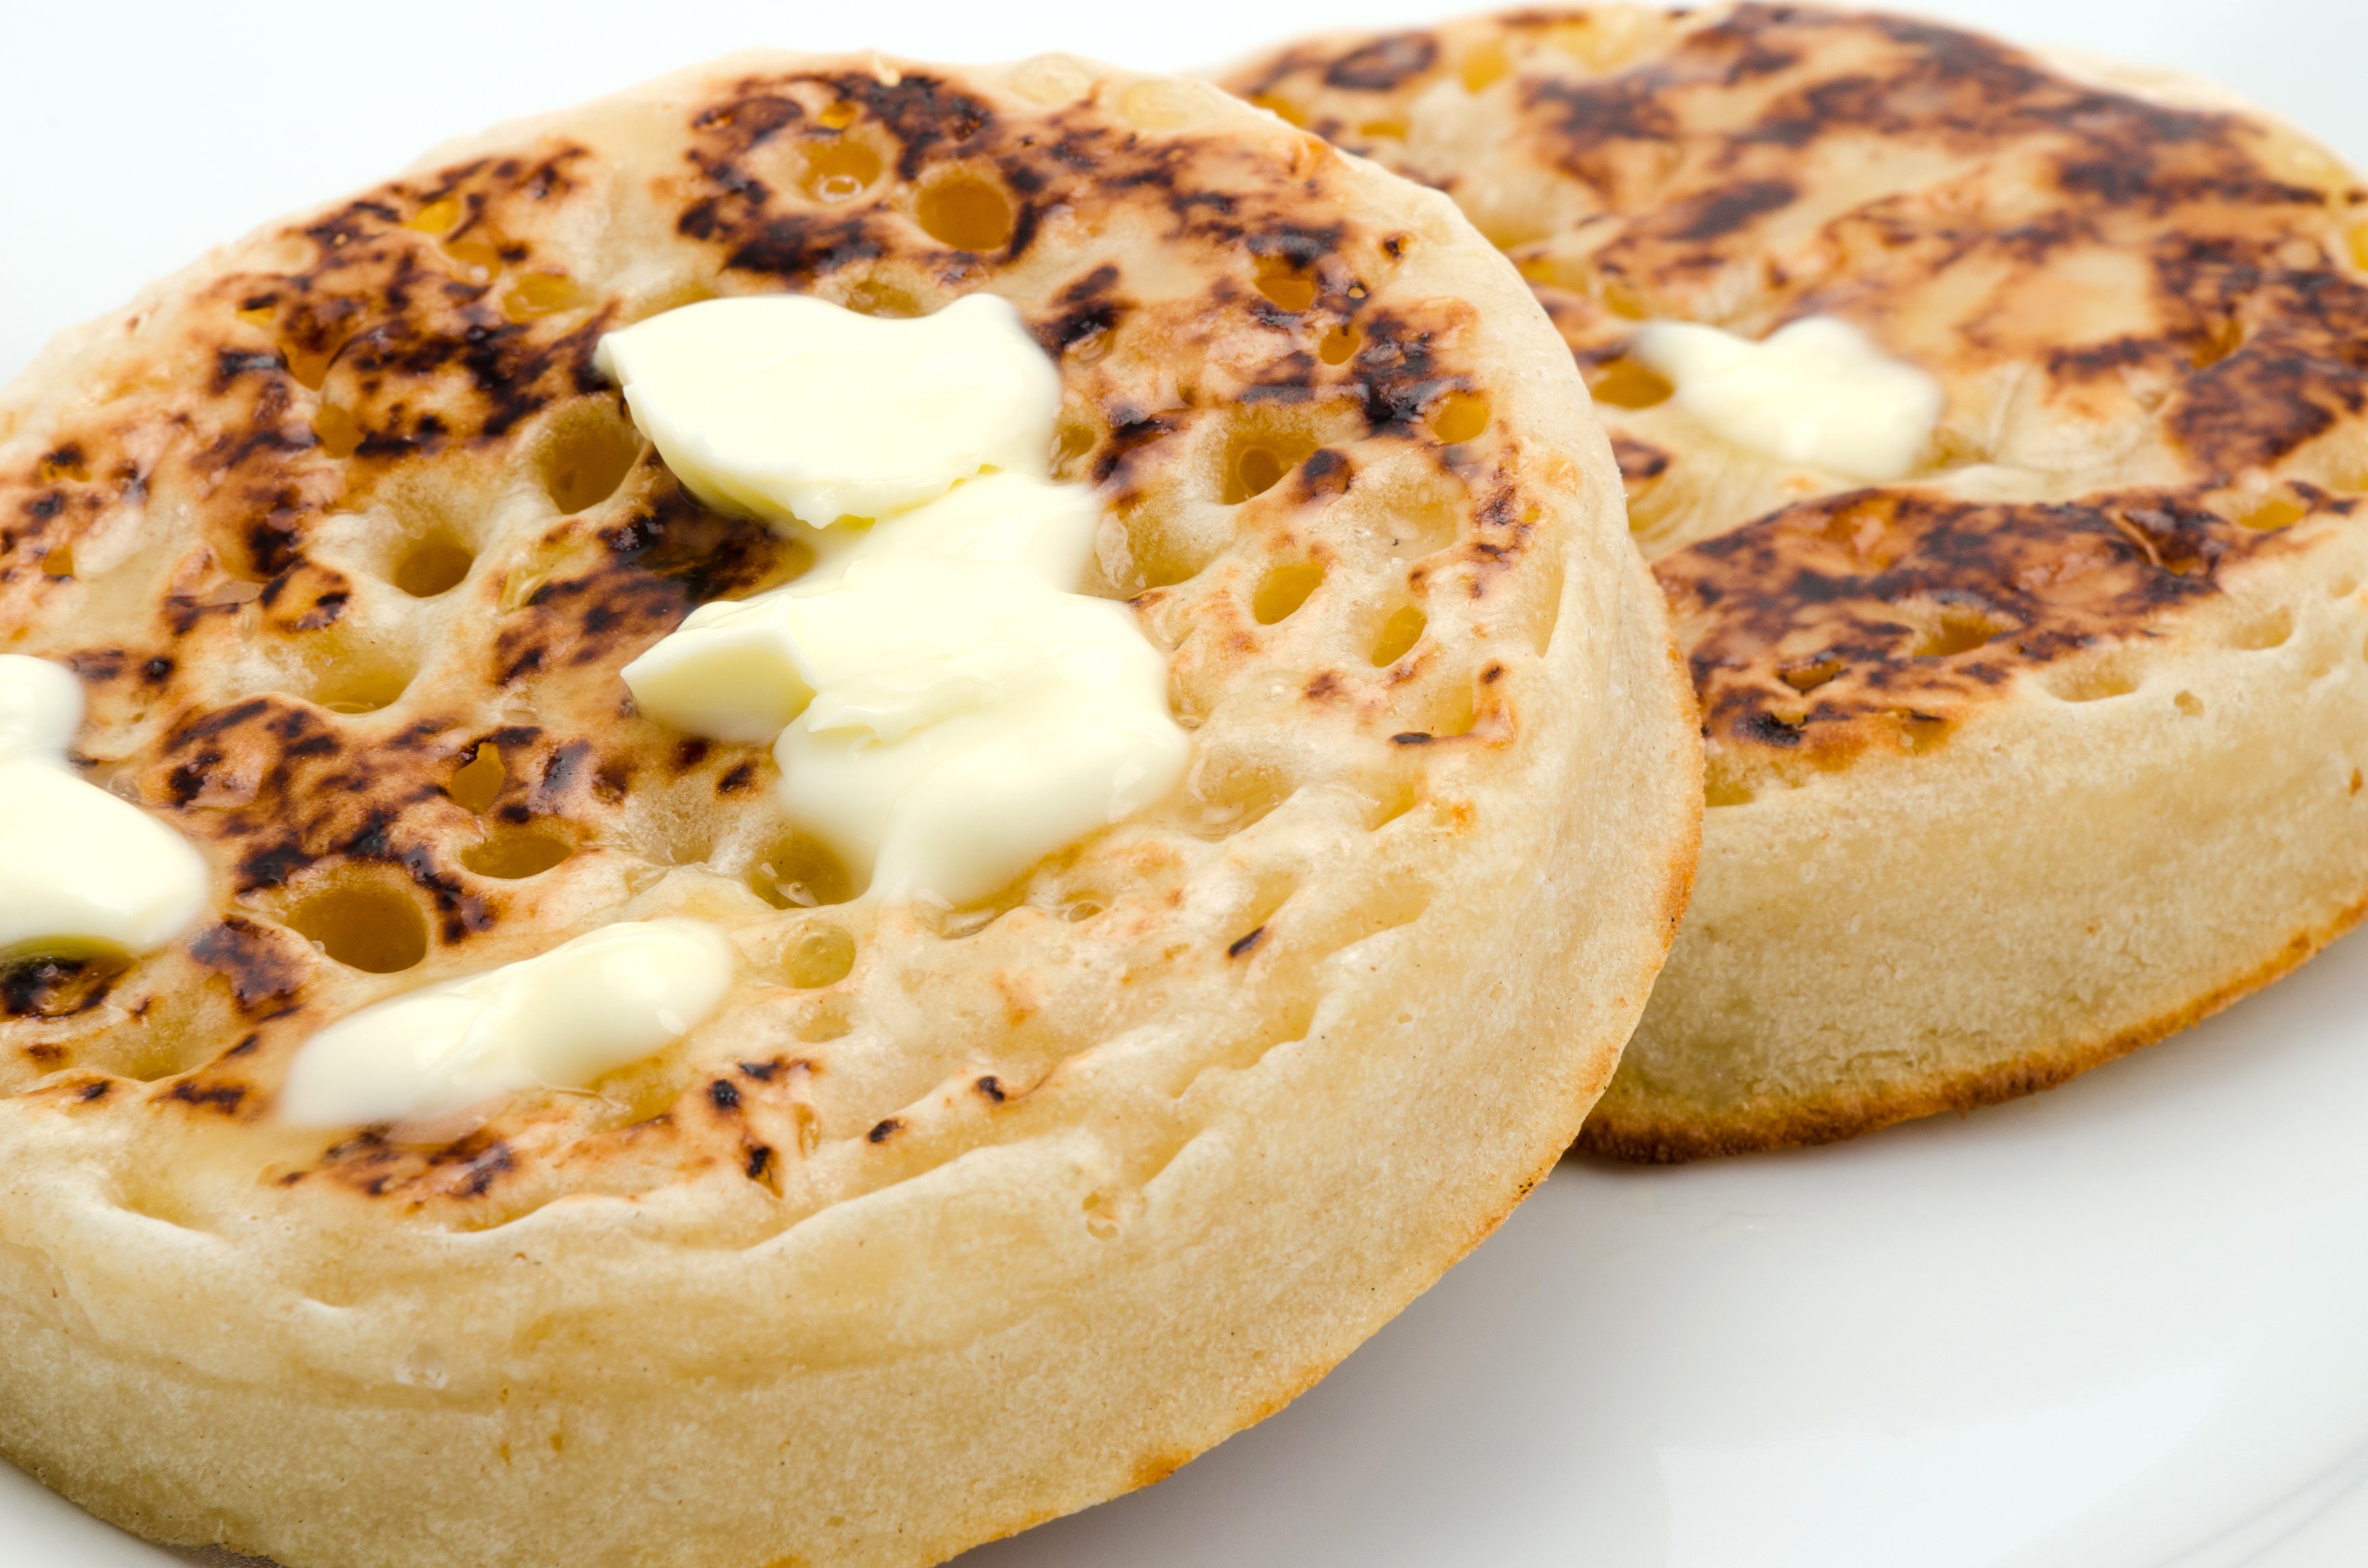 The Americans have not yet created something that elevates butter the way a crumpet can